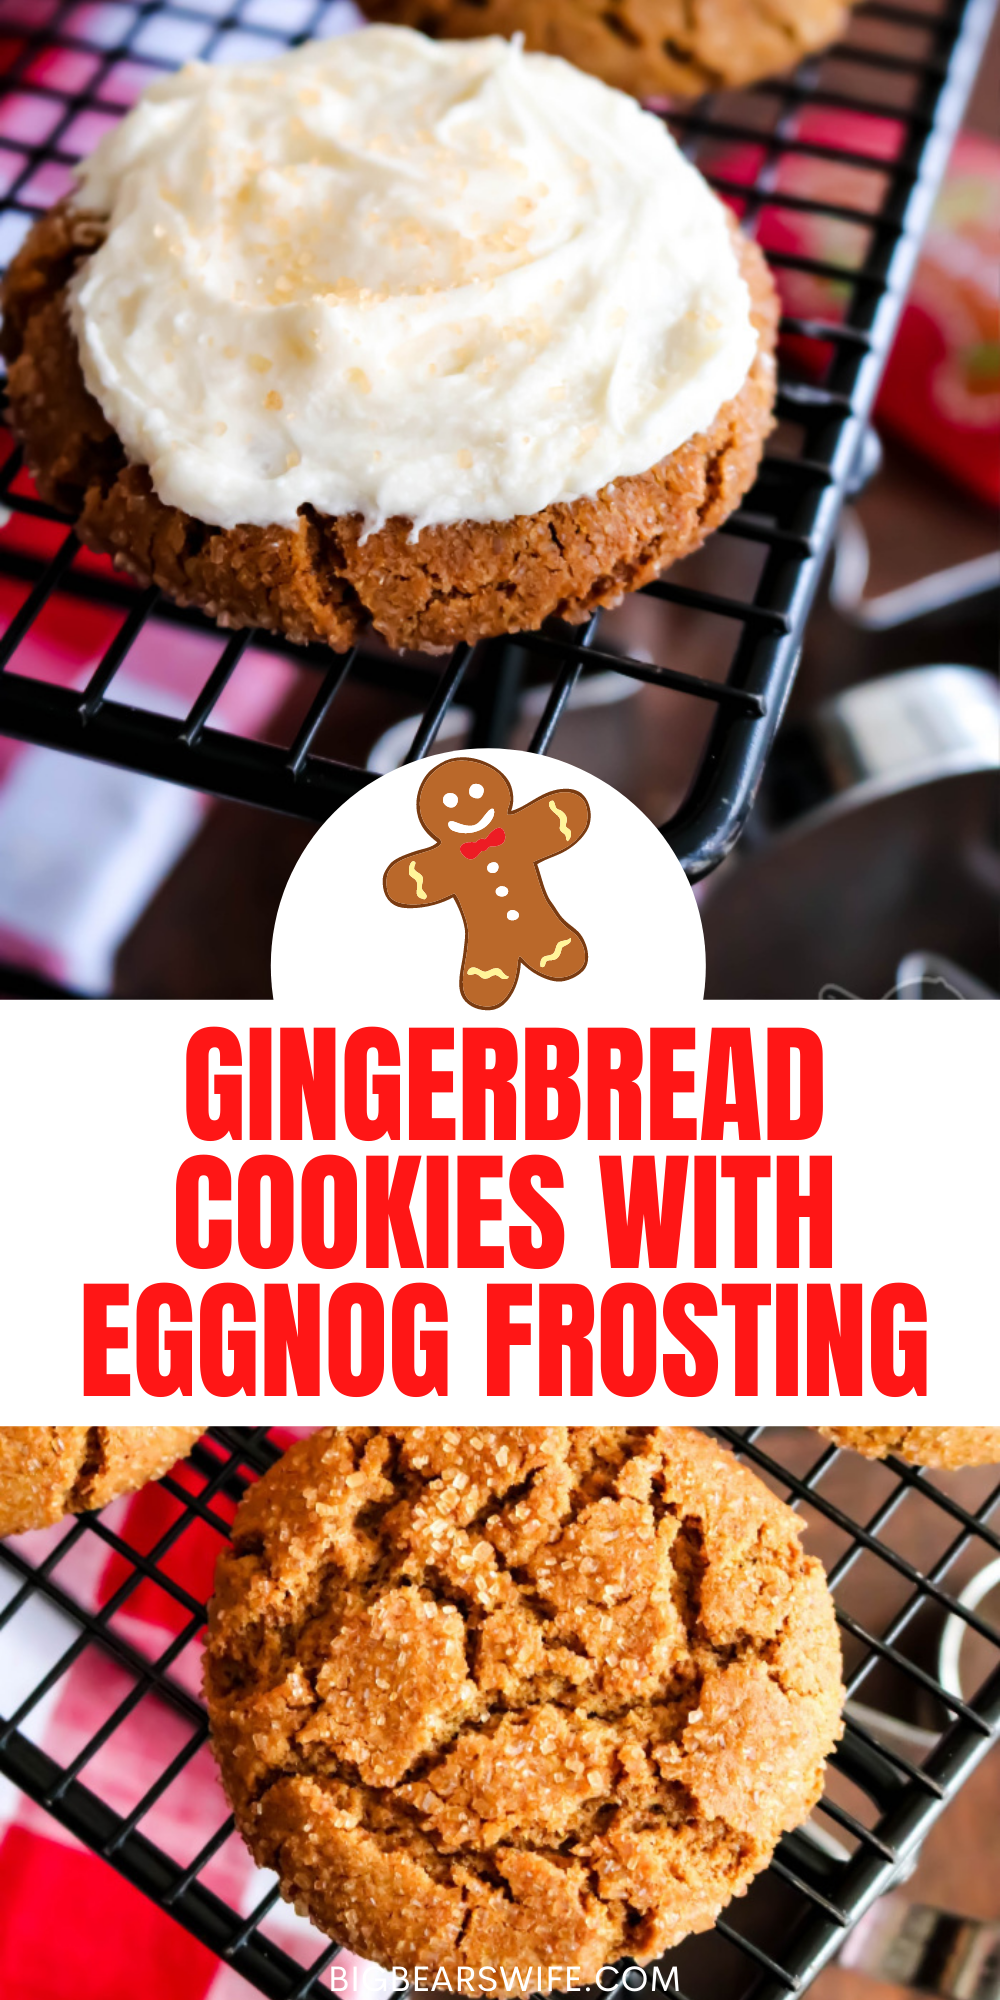 These Gingerbread Cookies are soft on the inside with a sugar coated crunch on the outside! They’re packed full of warm spices and topped with a homemade eggnog frosting to create the perfect holiday cookie! via @bigbearswife